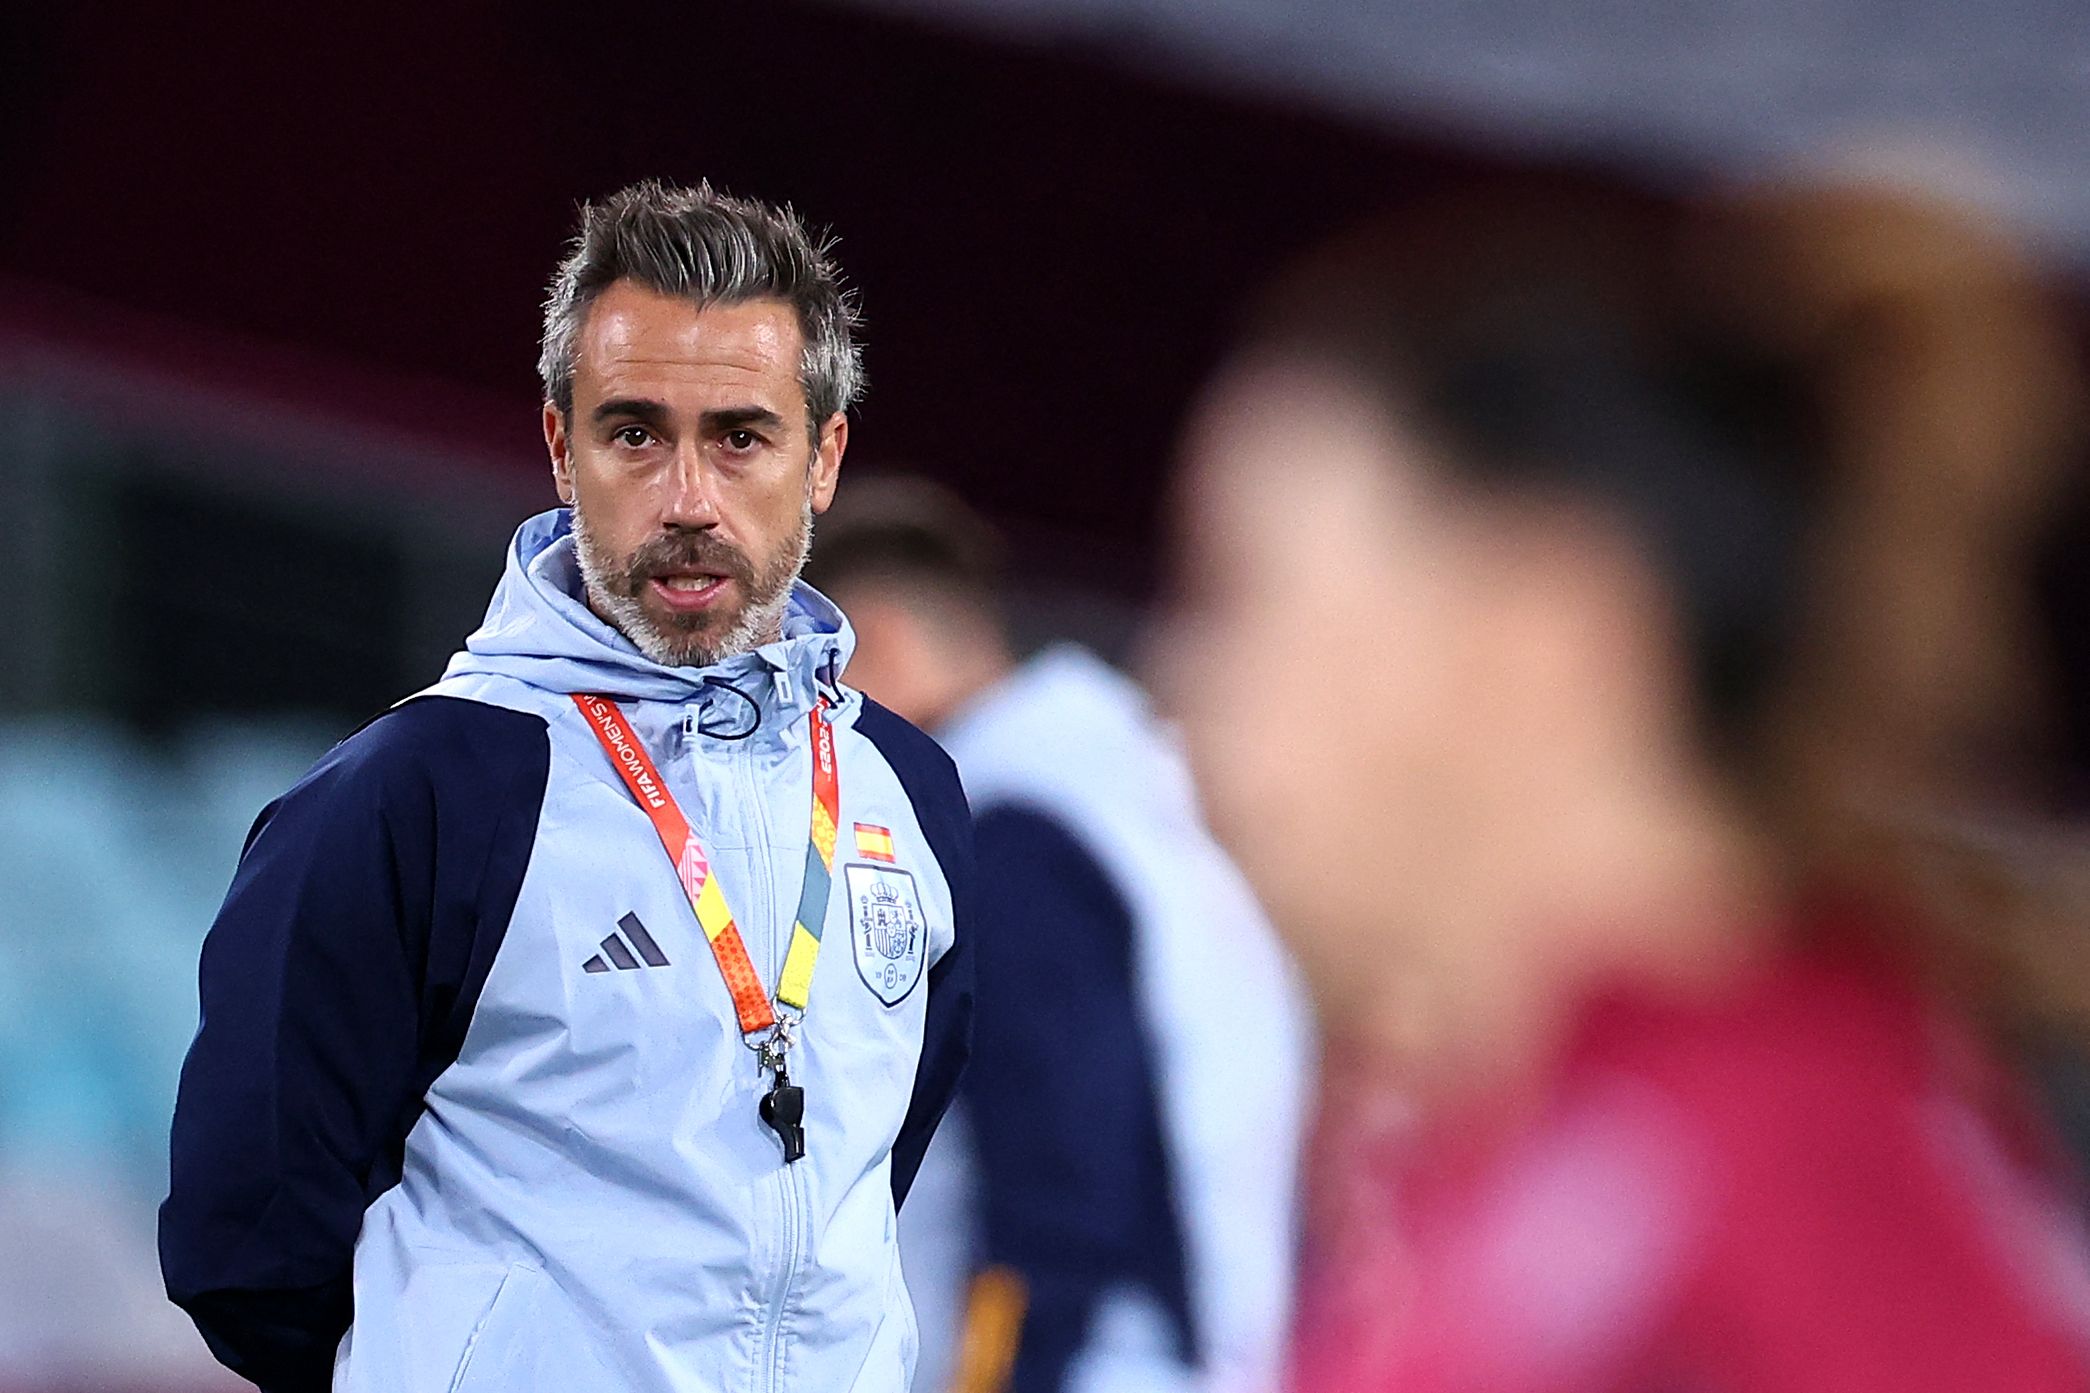 Jorge Vilda to become Morocco women’s boss a month after being fired from Spain head coach job